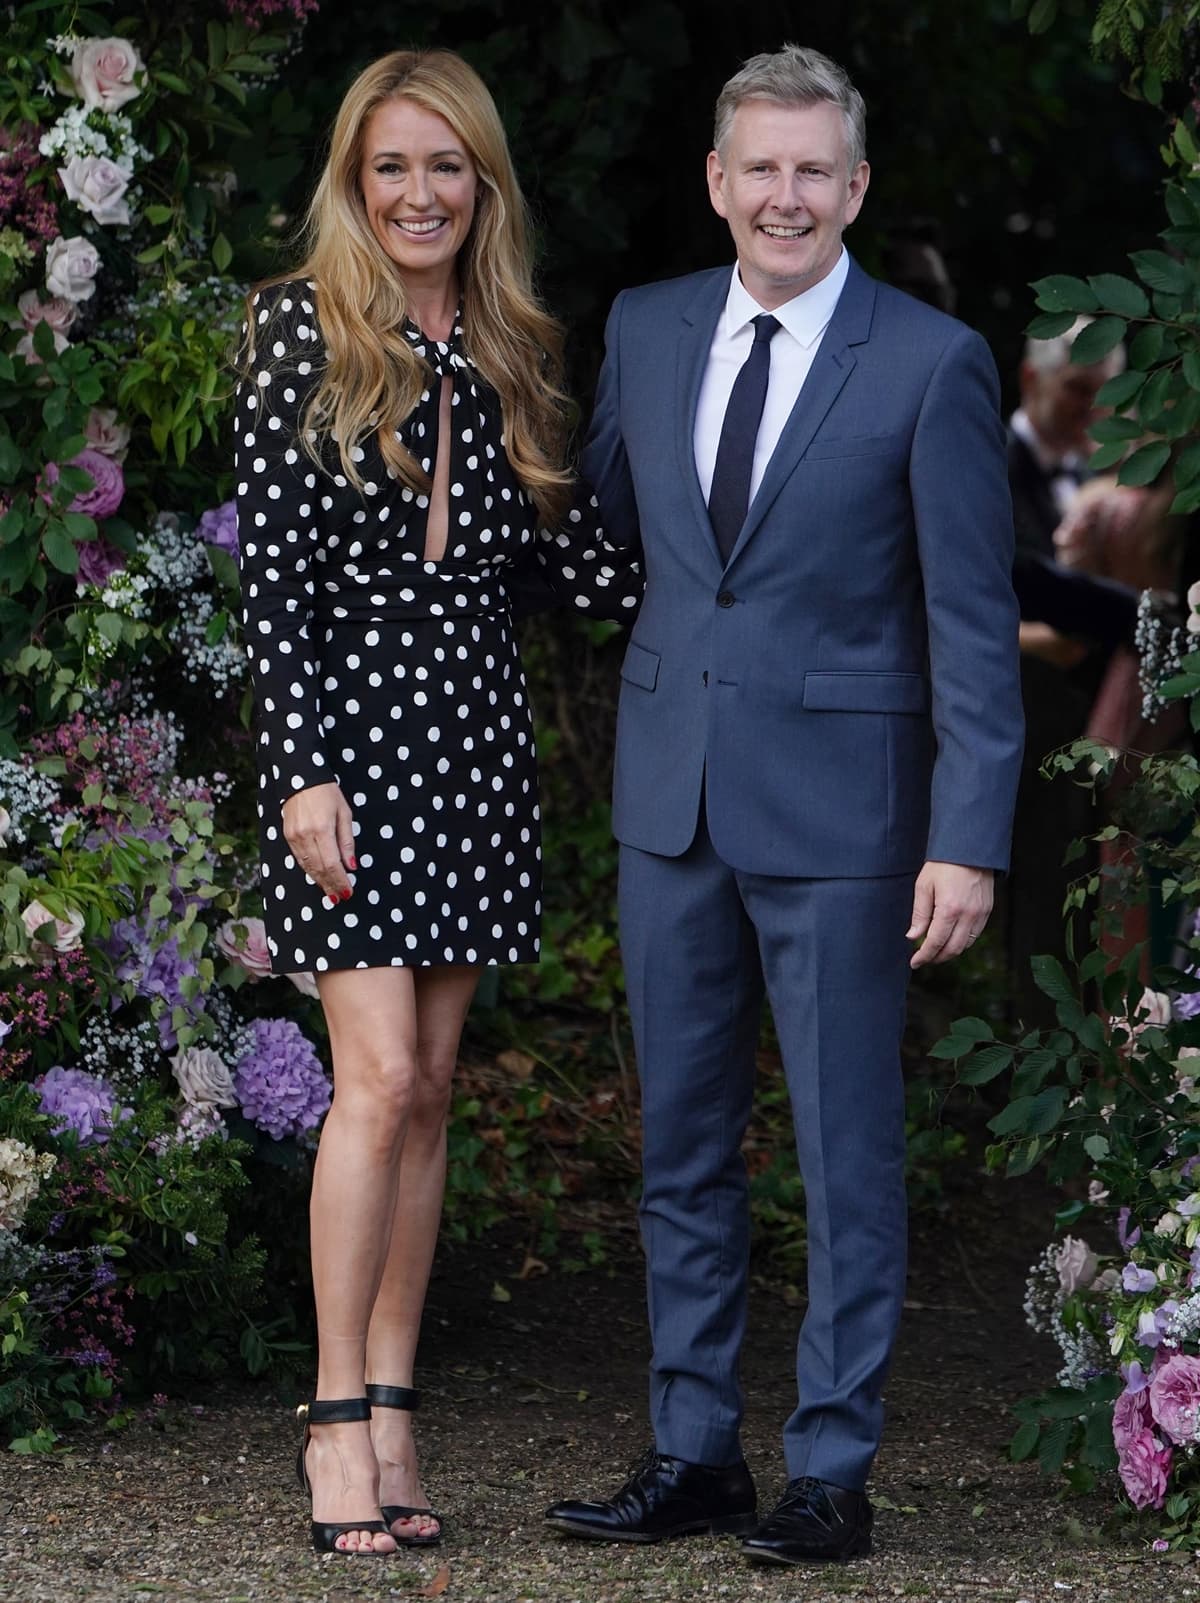 Cat Deeley and her husband Patrick Kielty at the wedding of Ant McPartlin and Anne-Marie Corbett at St Michael's Church